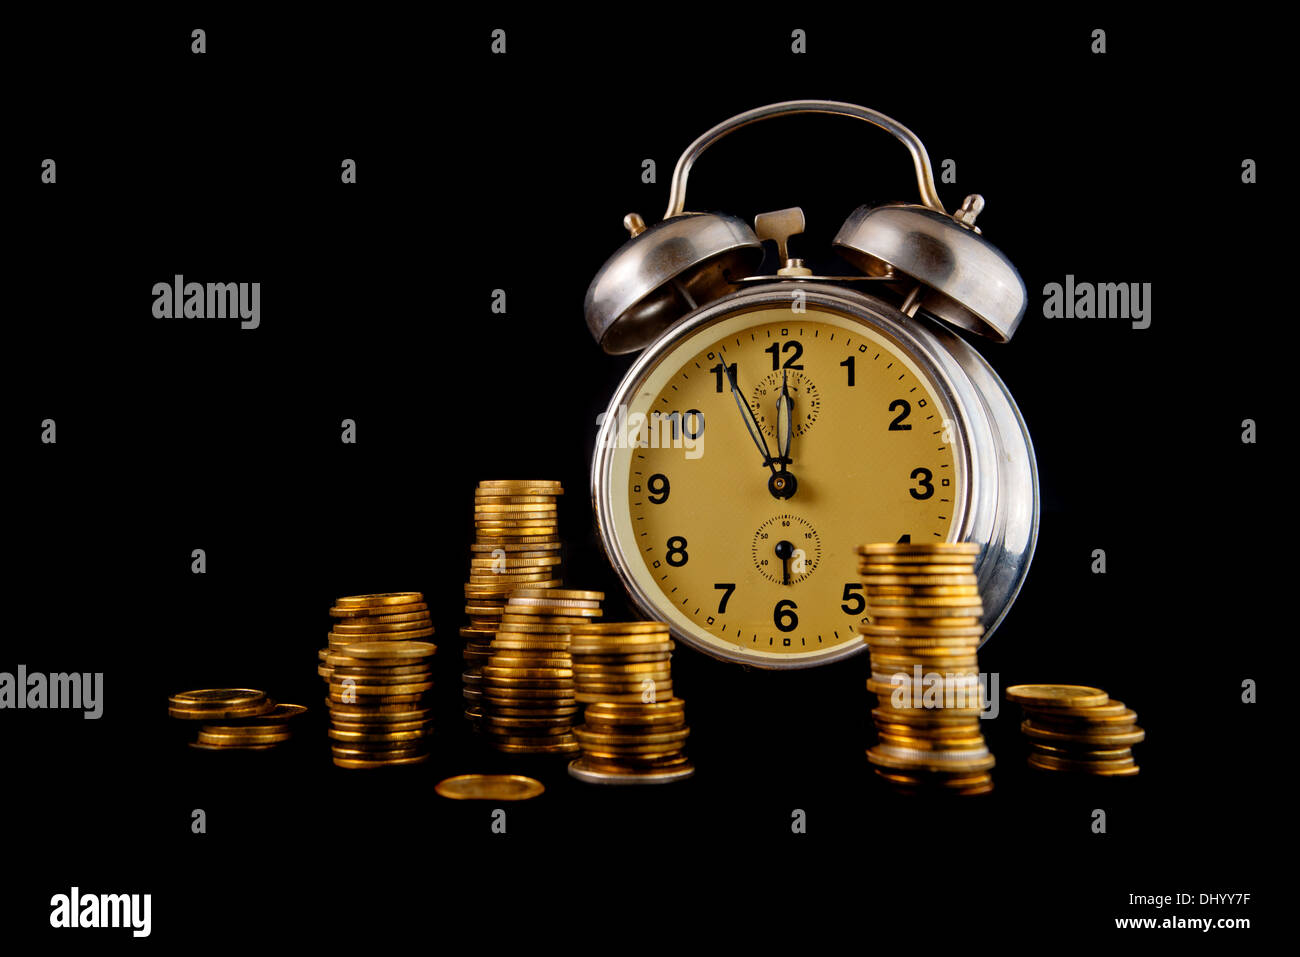 Golden coin stack and vintage clock on dark background. Time is money concept. Stock Photo